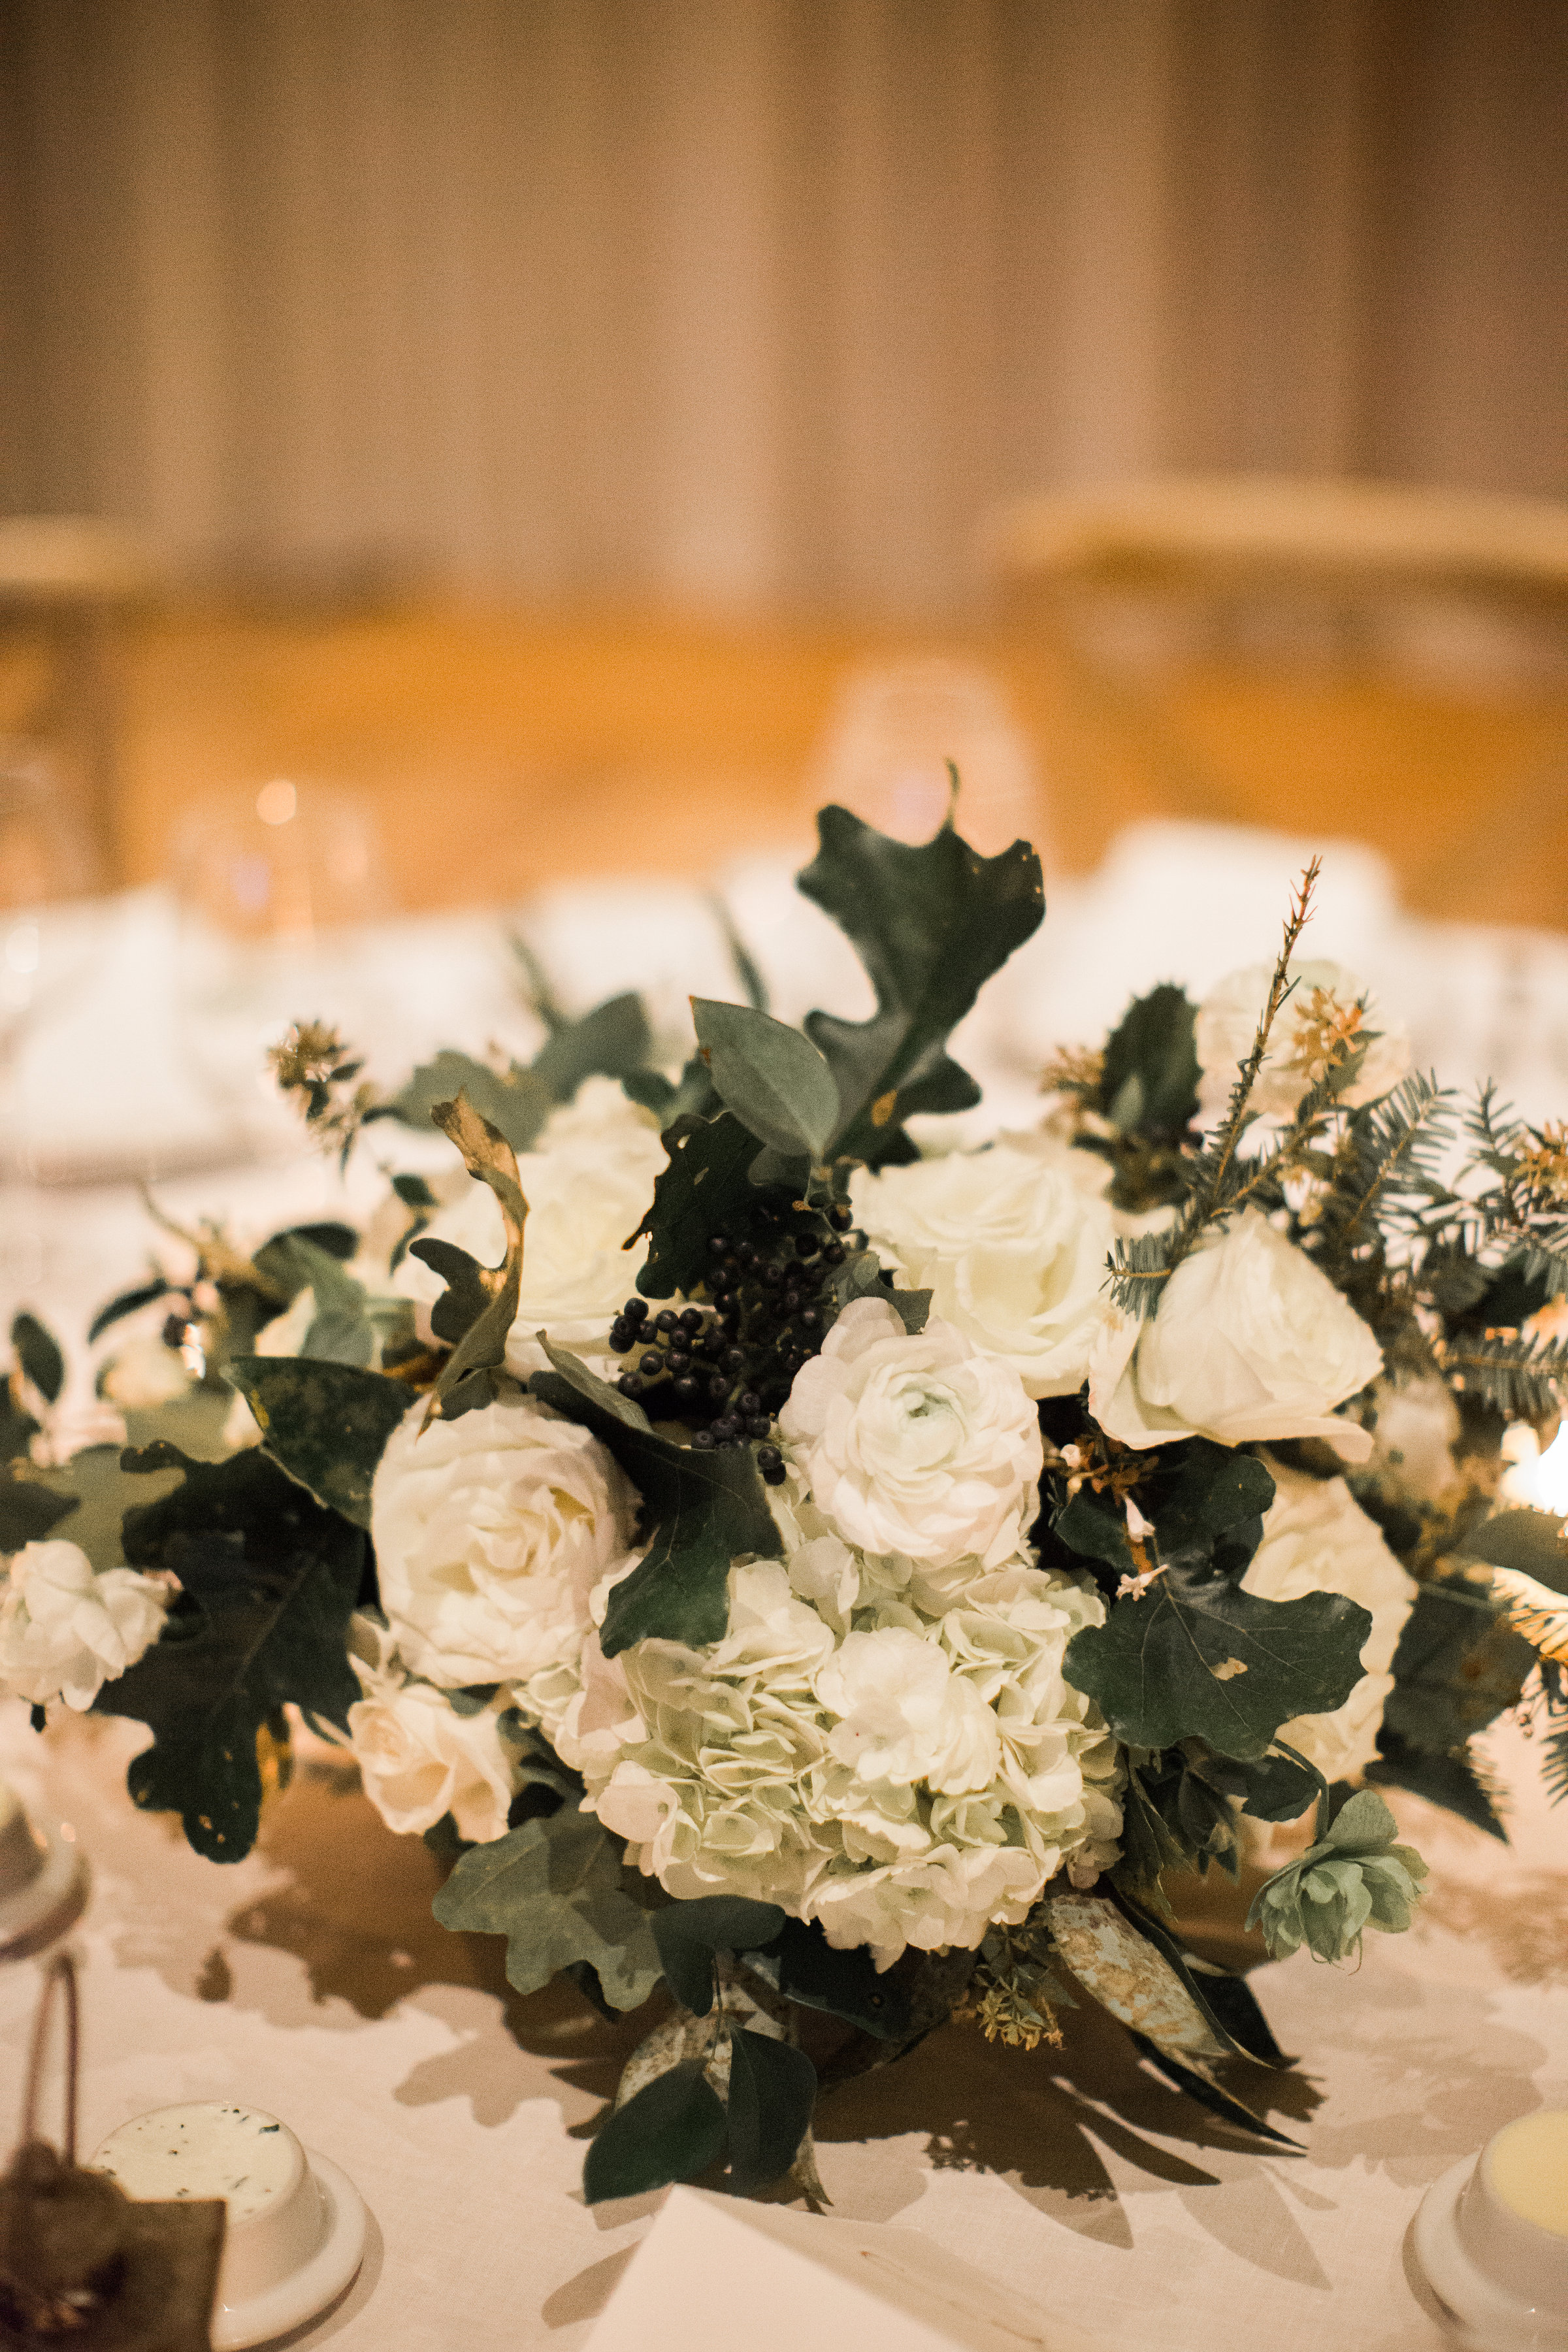 Natural, untamed centerpiece with white flowers and greenery // Blackberry Farm Wedding Florist